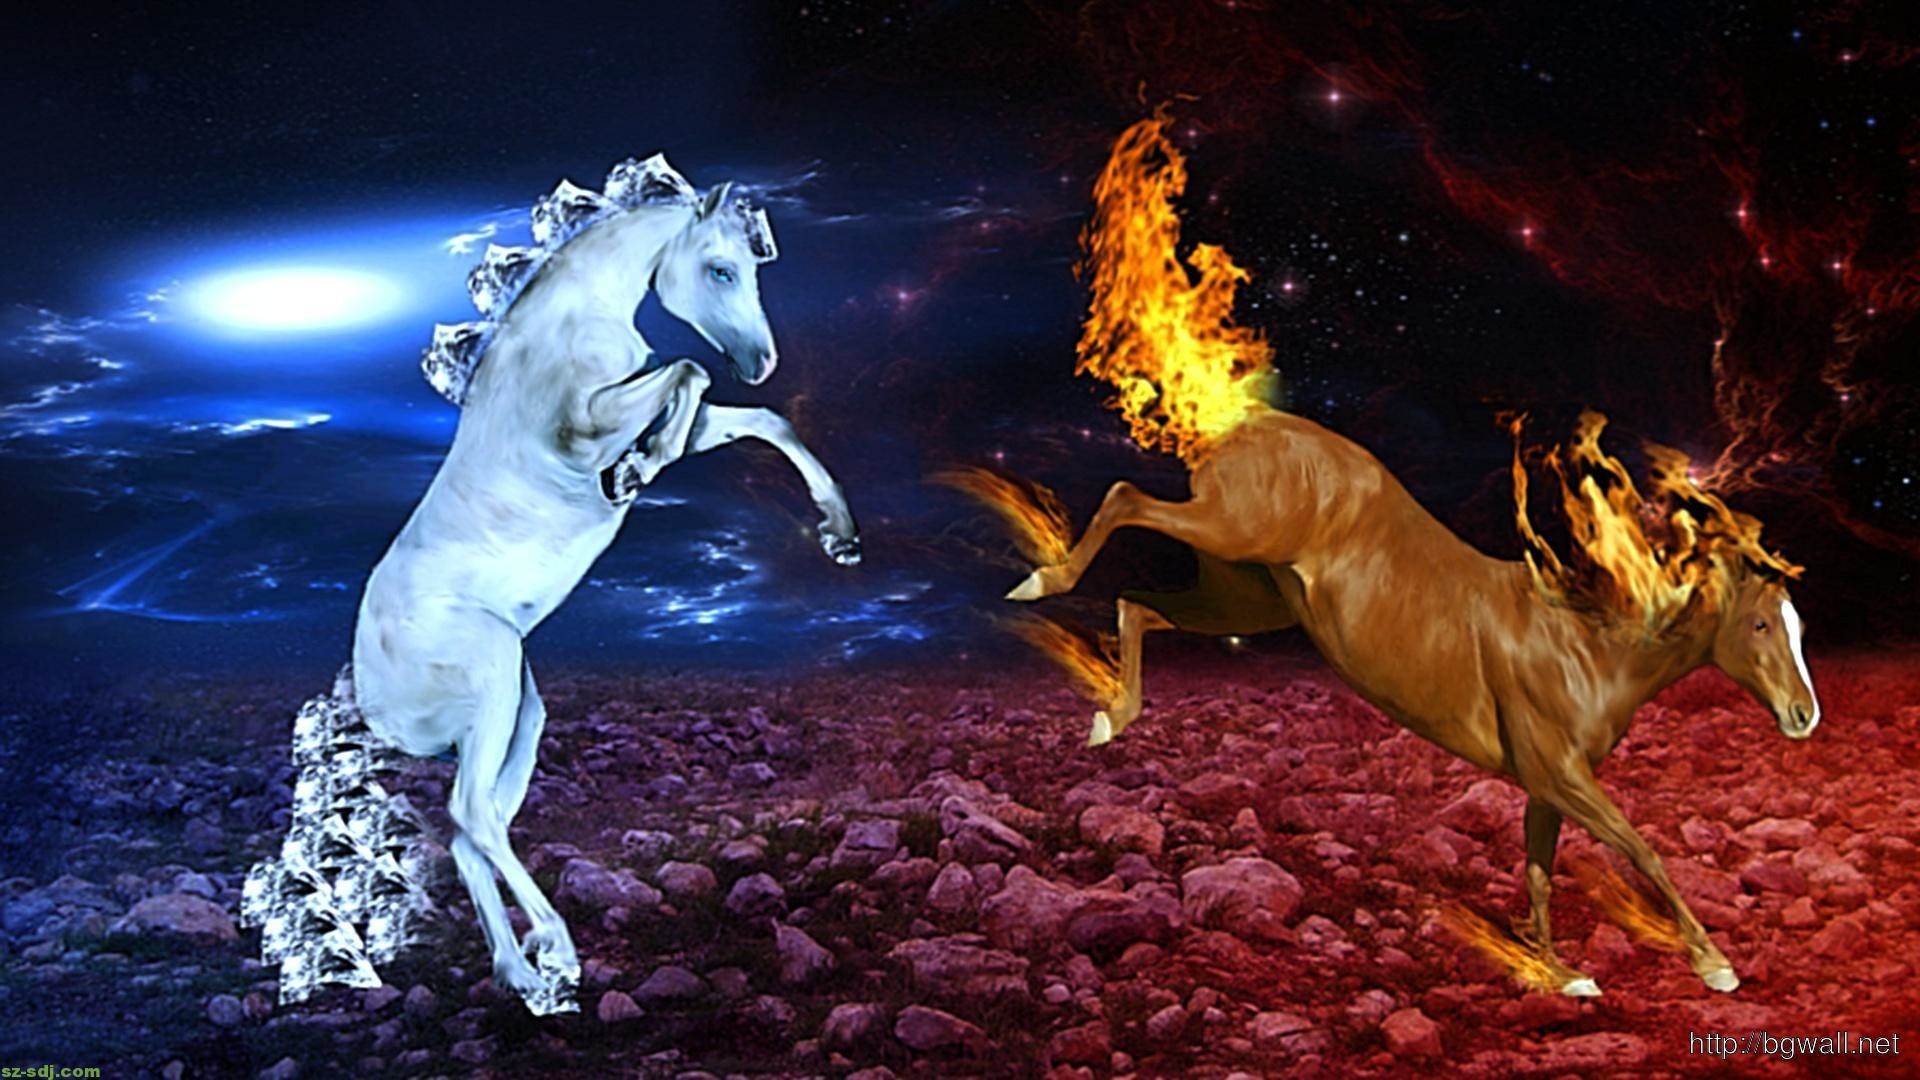 1920x1080 Horse Ice And Fire Cool Image Wallpaper